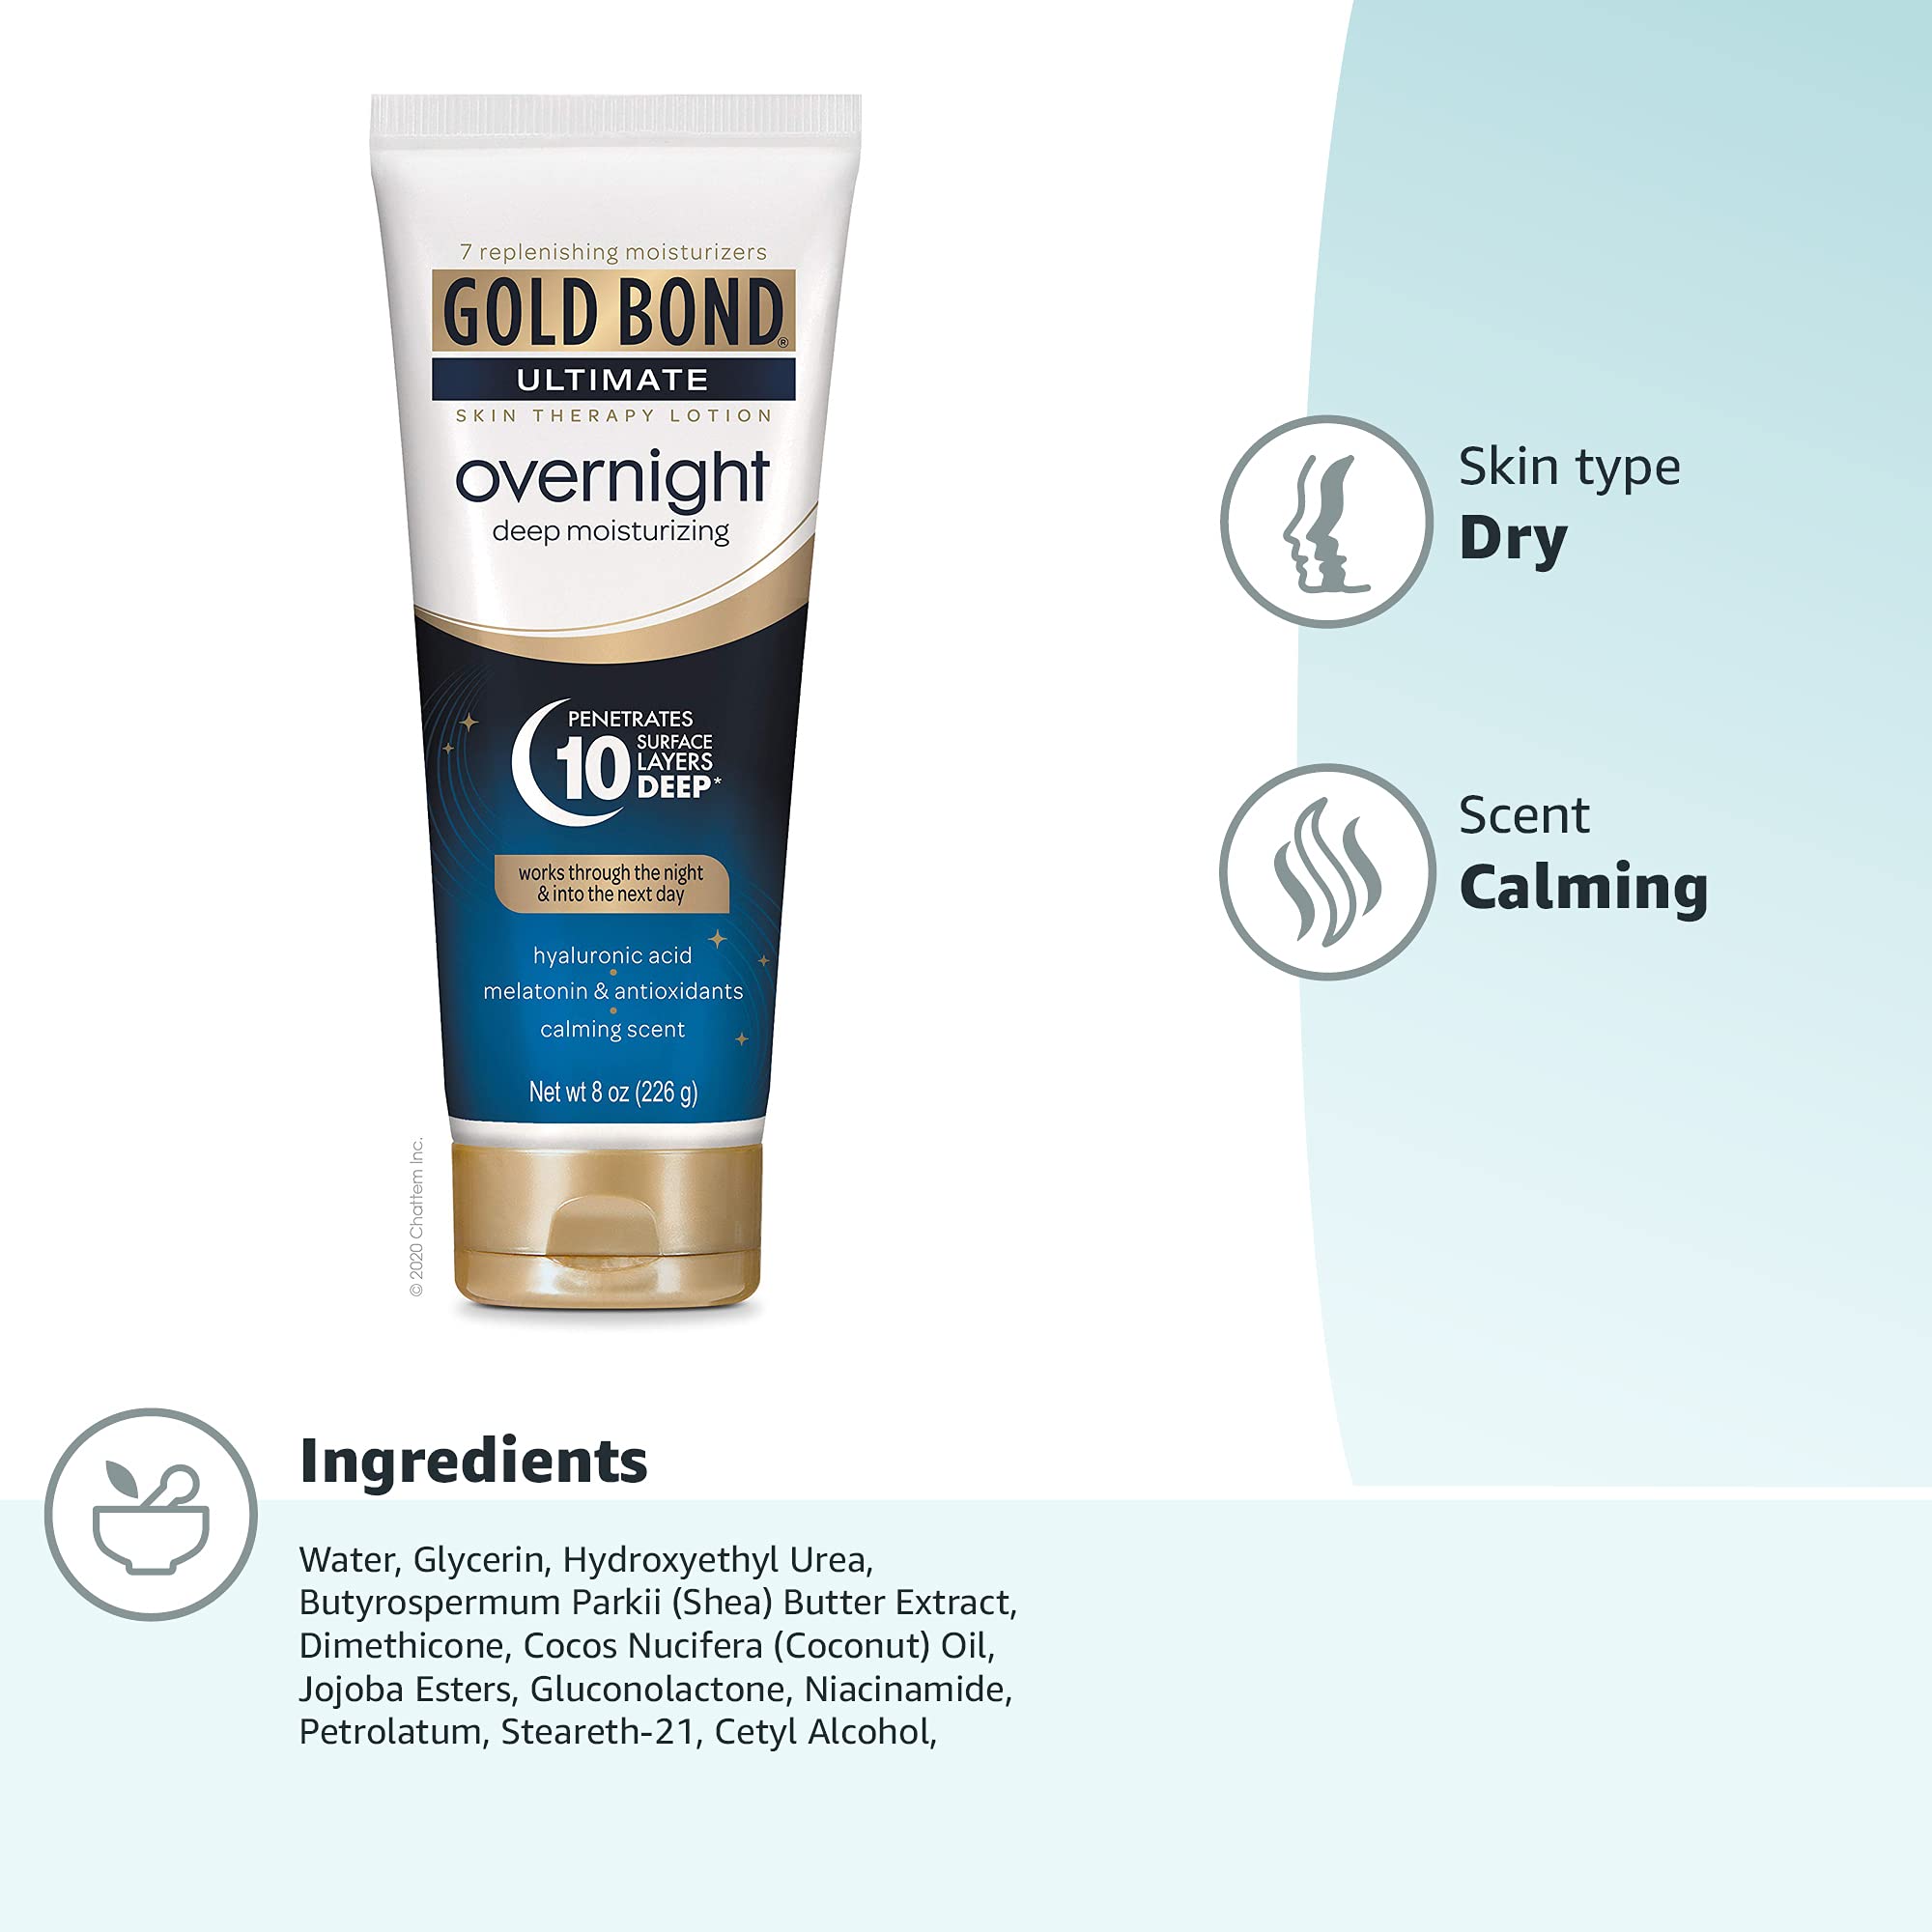 Gold Bond Overnight Deep Moisturizing Lotion, 8 oz., Skin Therapy Lotion With Calming Scent